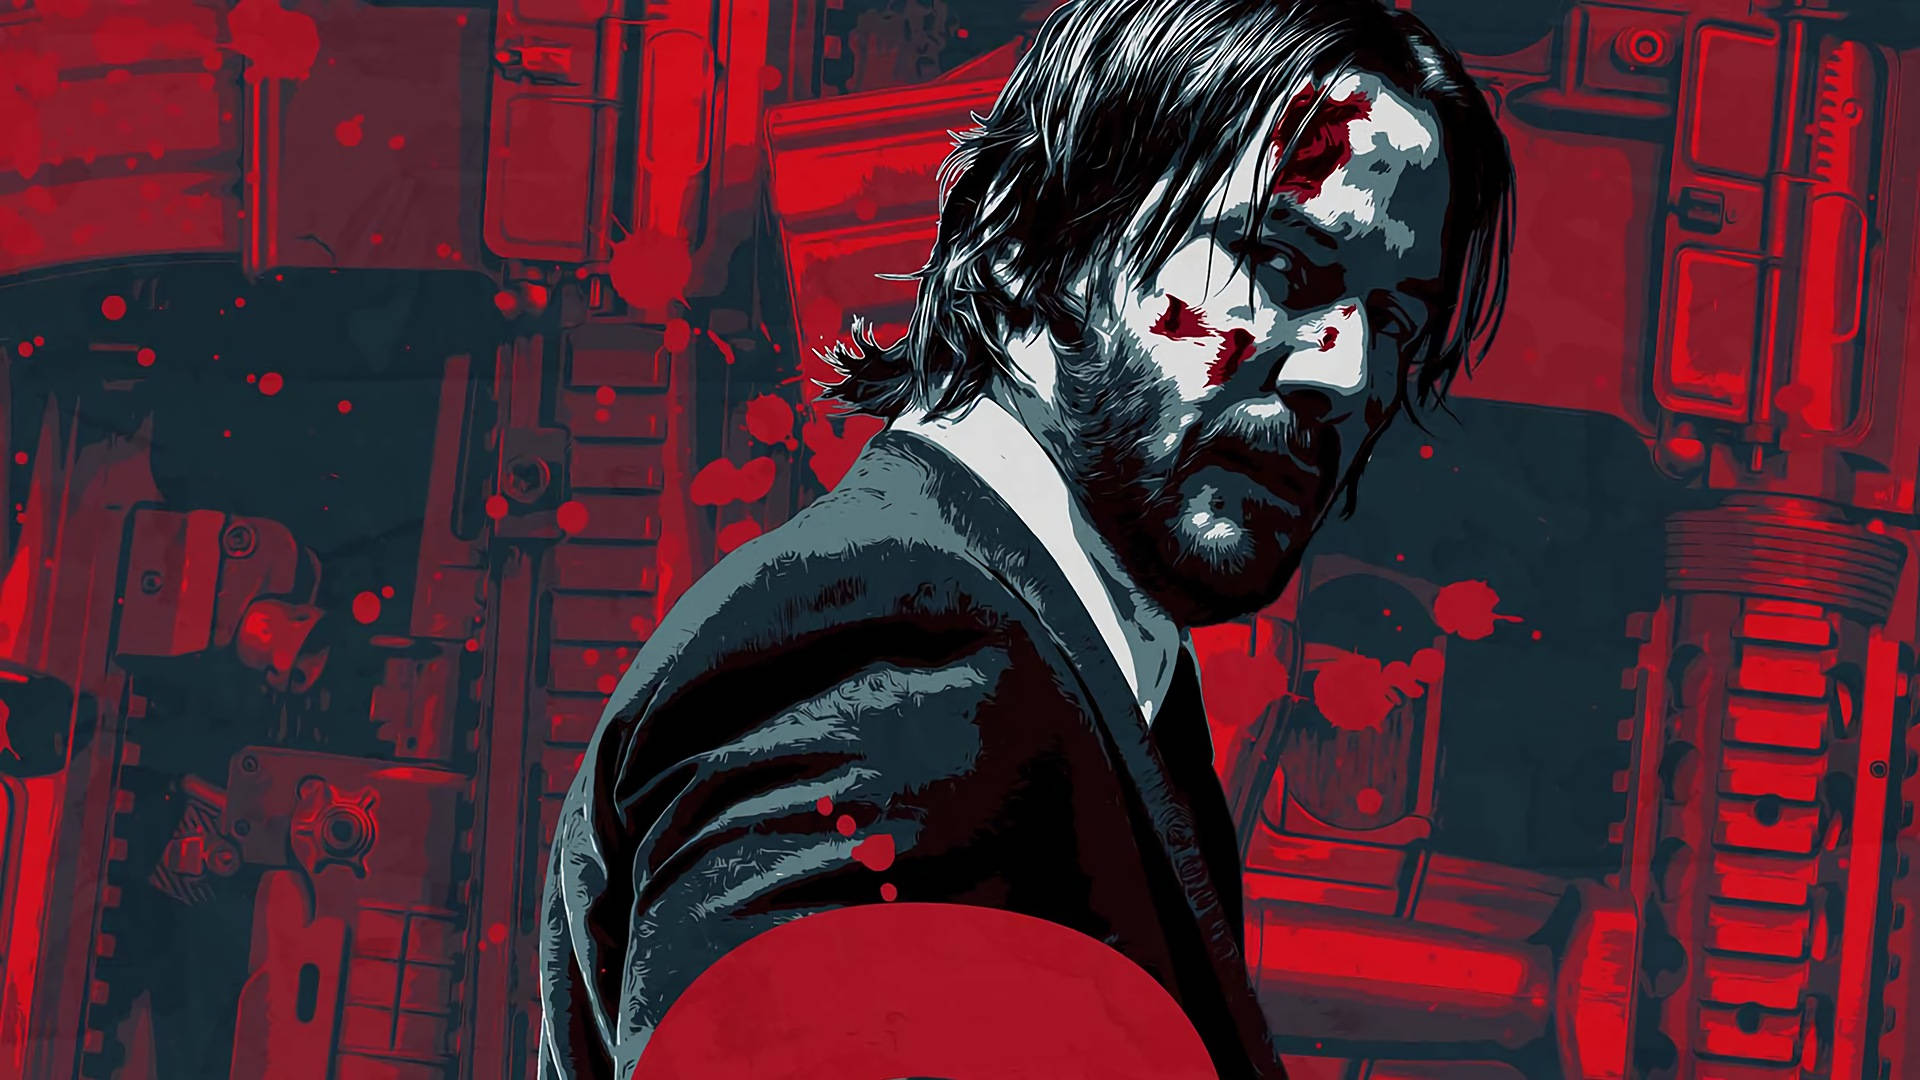 The John Wick Universe is Cancel Culture — Remains of the Day